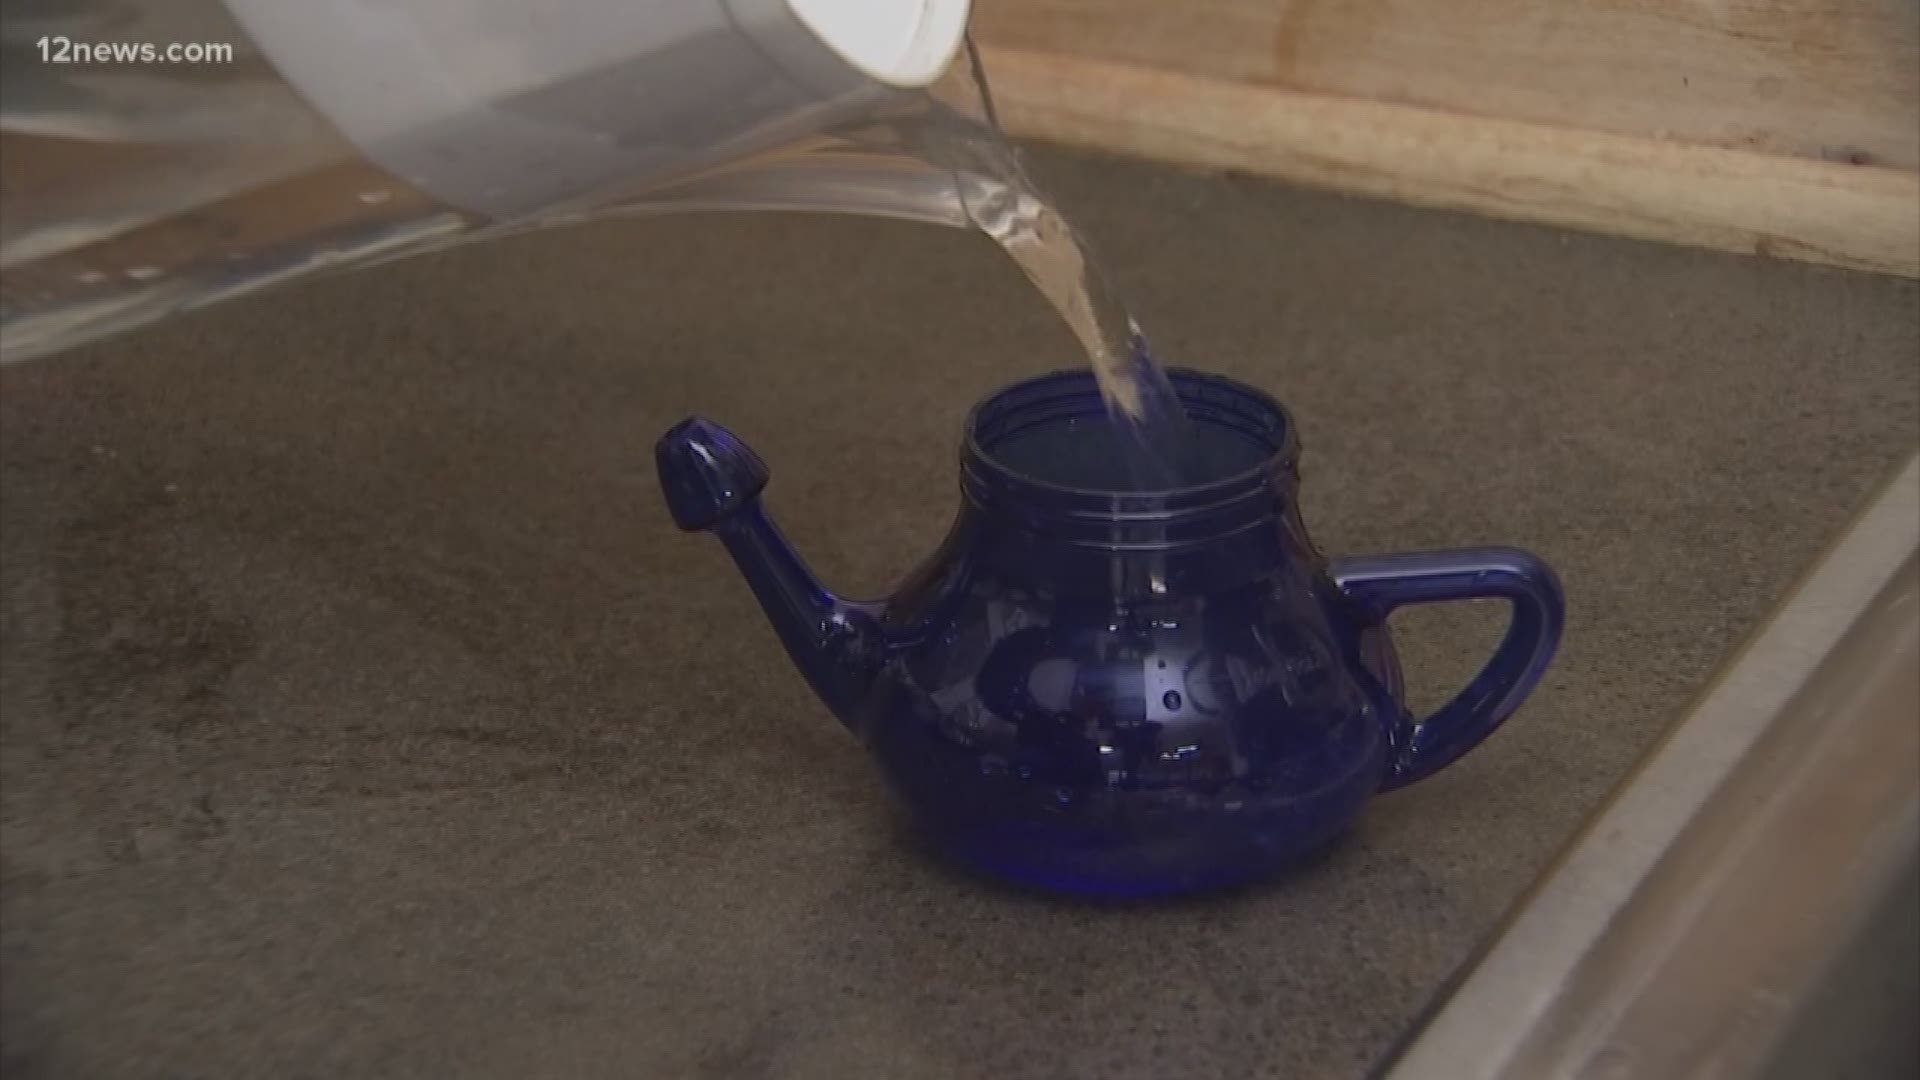 Many use a neti pot to clear out their nasal passages, but you need to be careful about the water you use in it. We verify if using tap water in your neti pot can kill you.